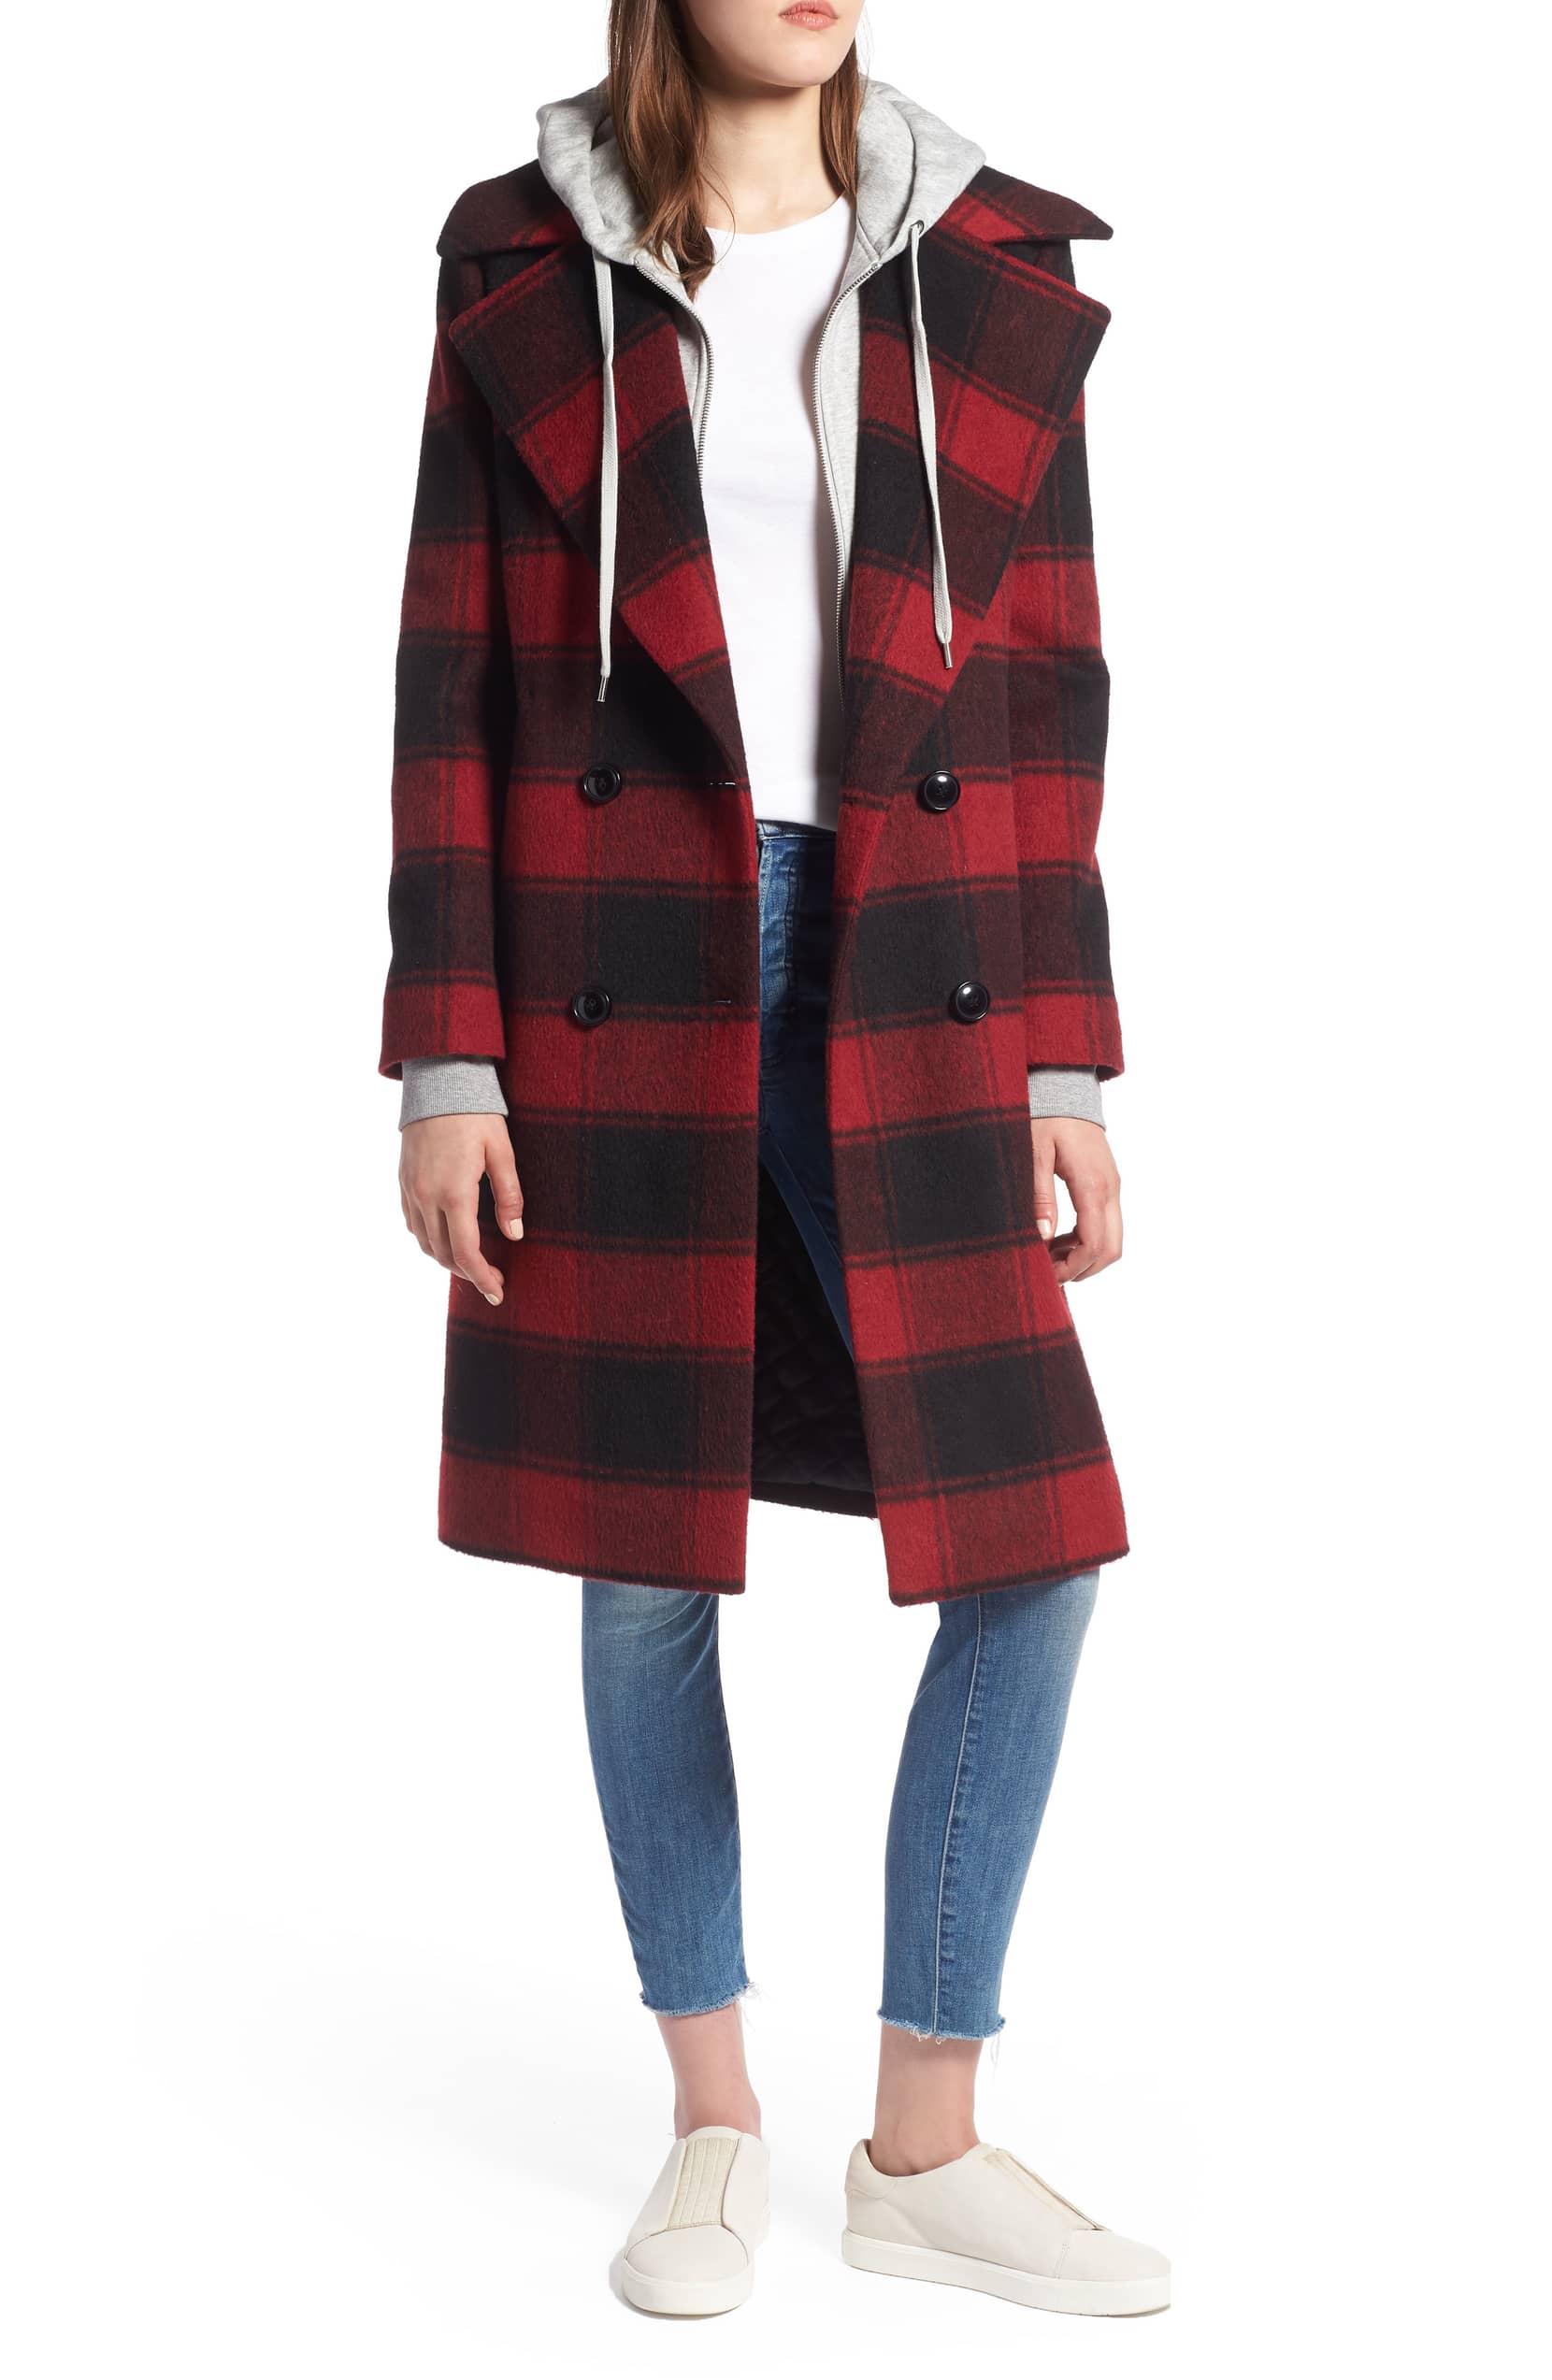 Shop This Pretty Plaid Coat From Kendall and Kylie Jenner's Clothing Line